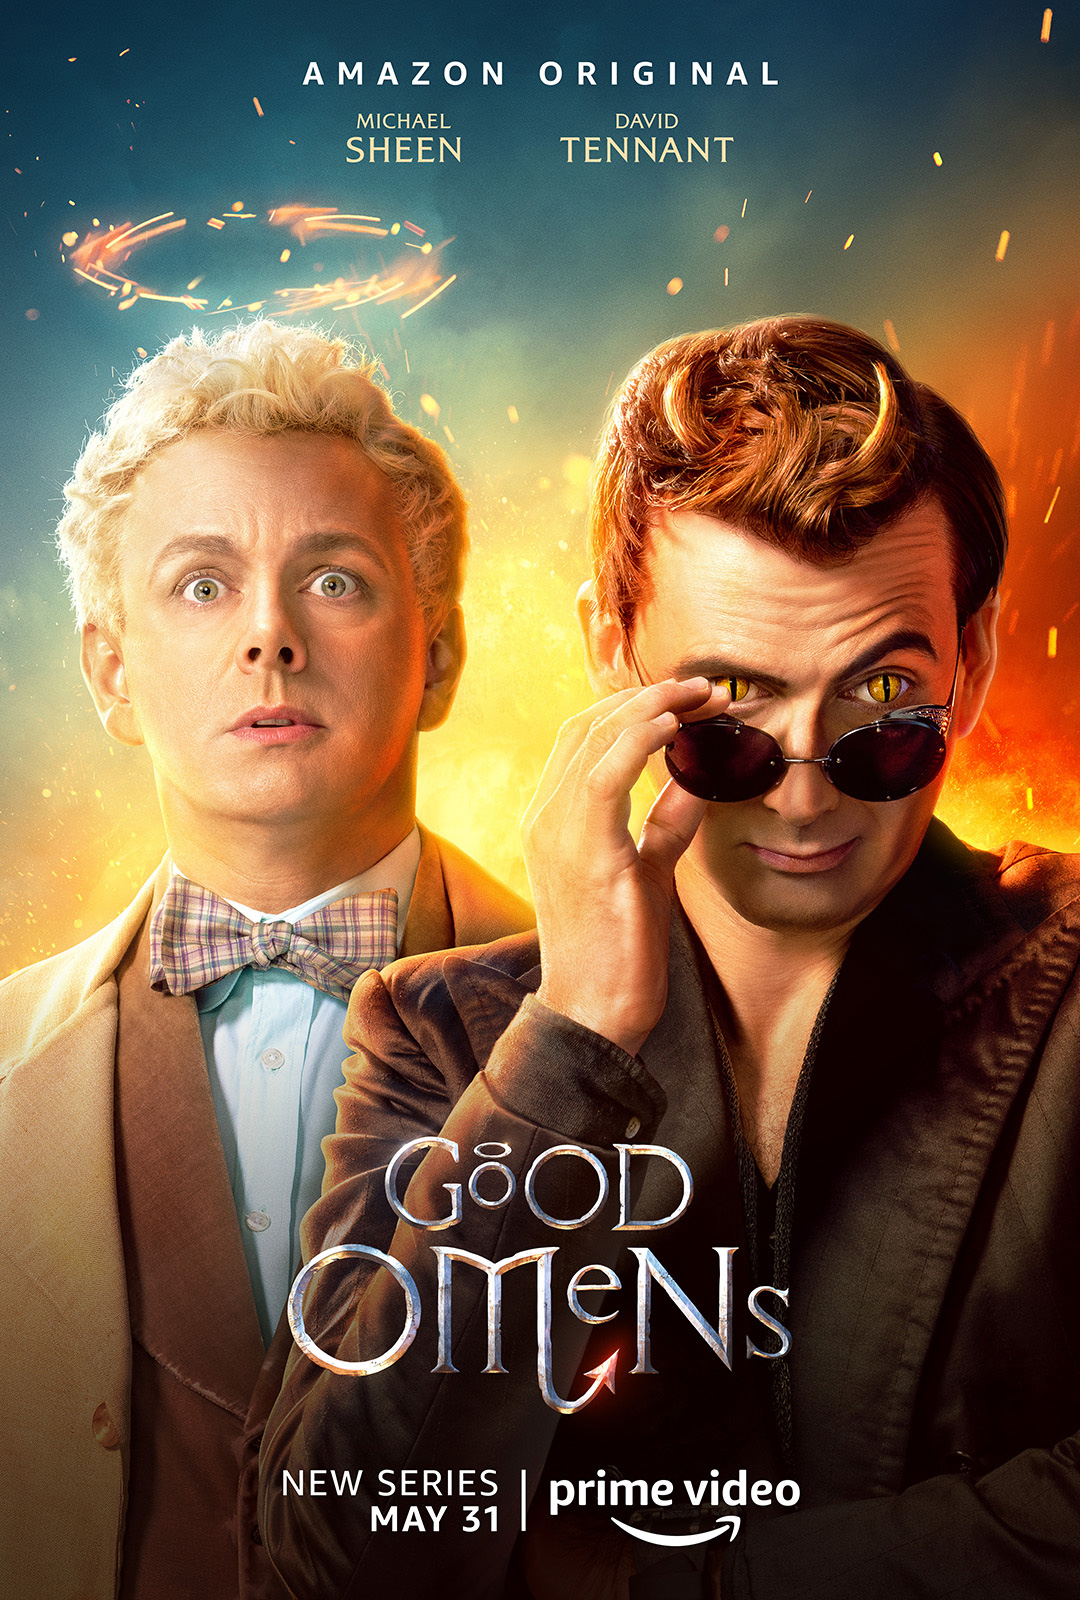 Michael Sheen and David Tennant in character posters for Amazon Prime’s “Good Omens”